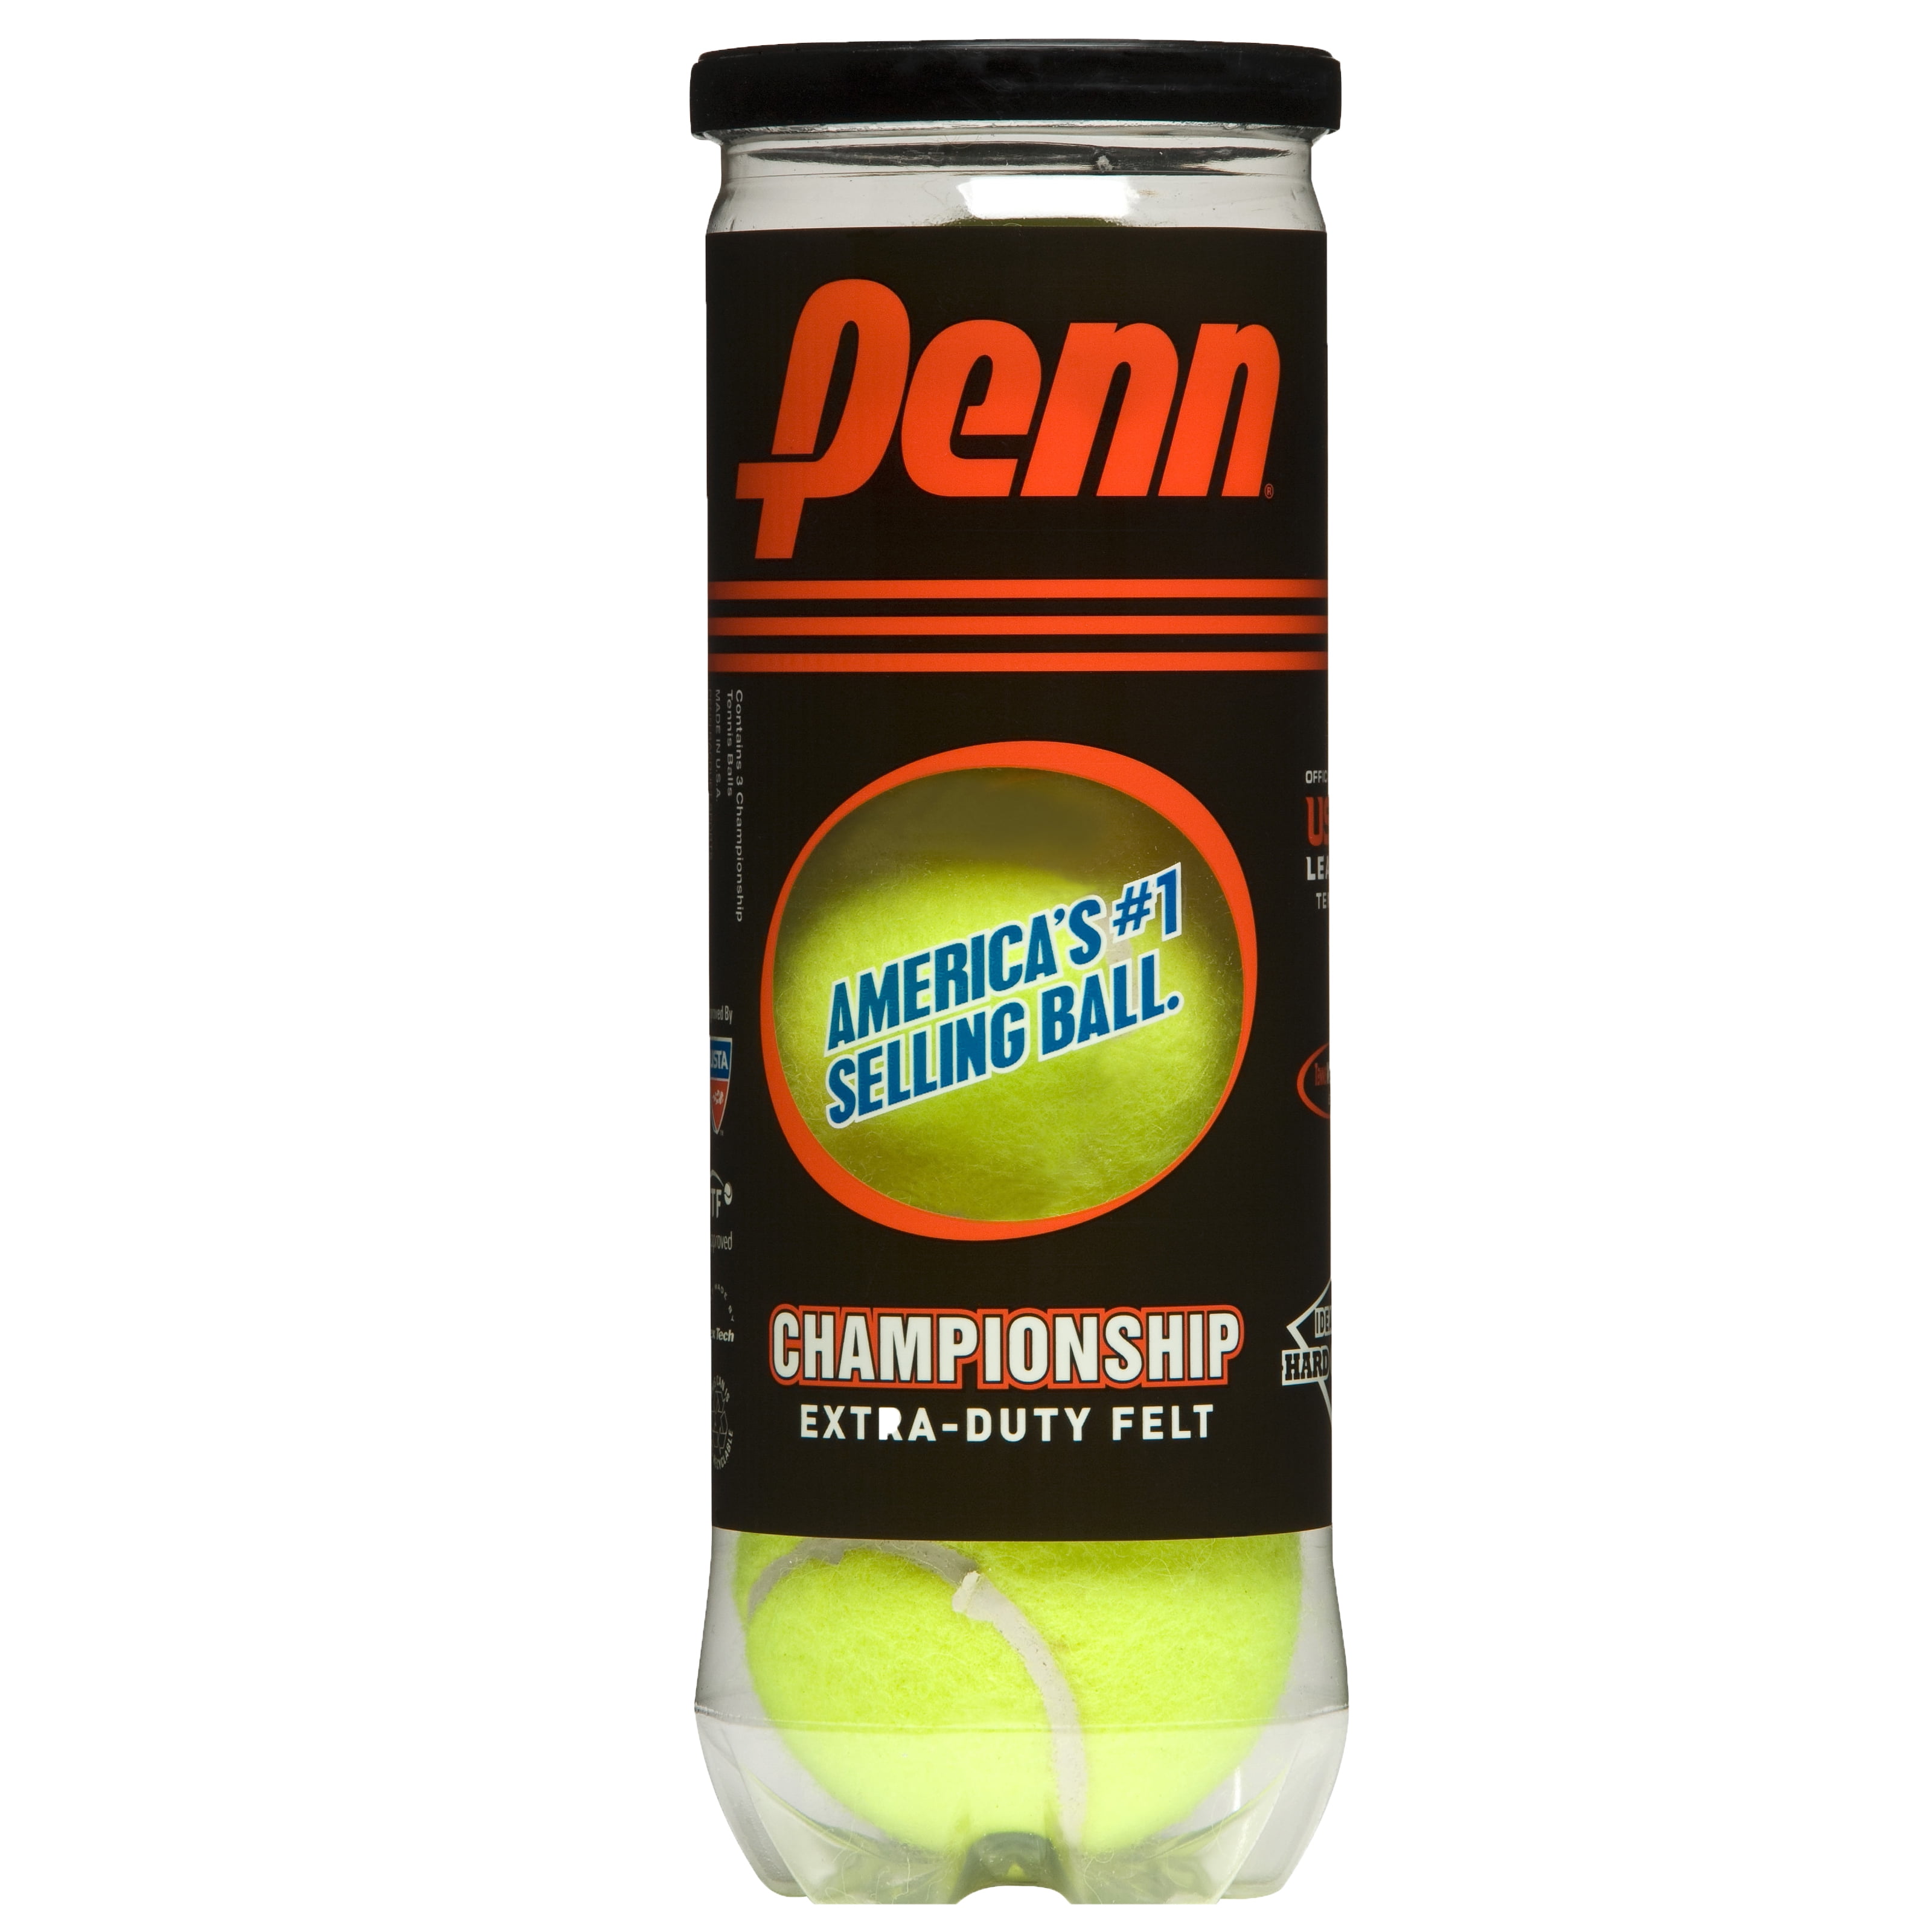 The Best Tennis Balls For Different Surfaces, Value For Money And